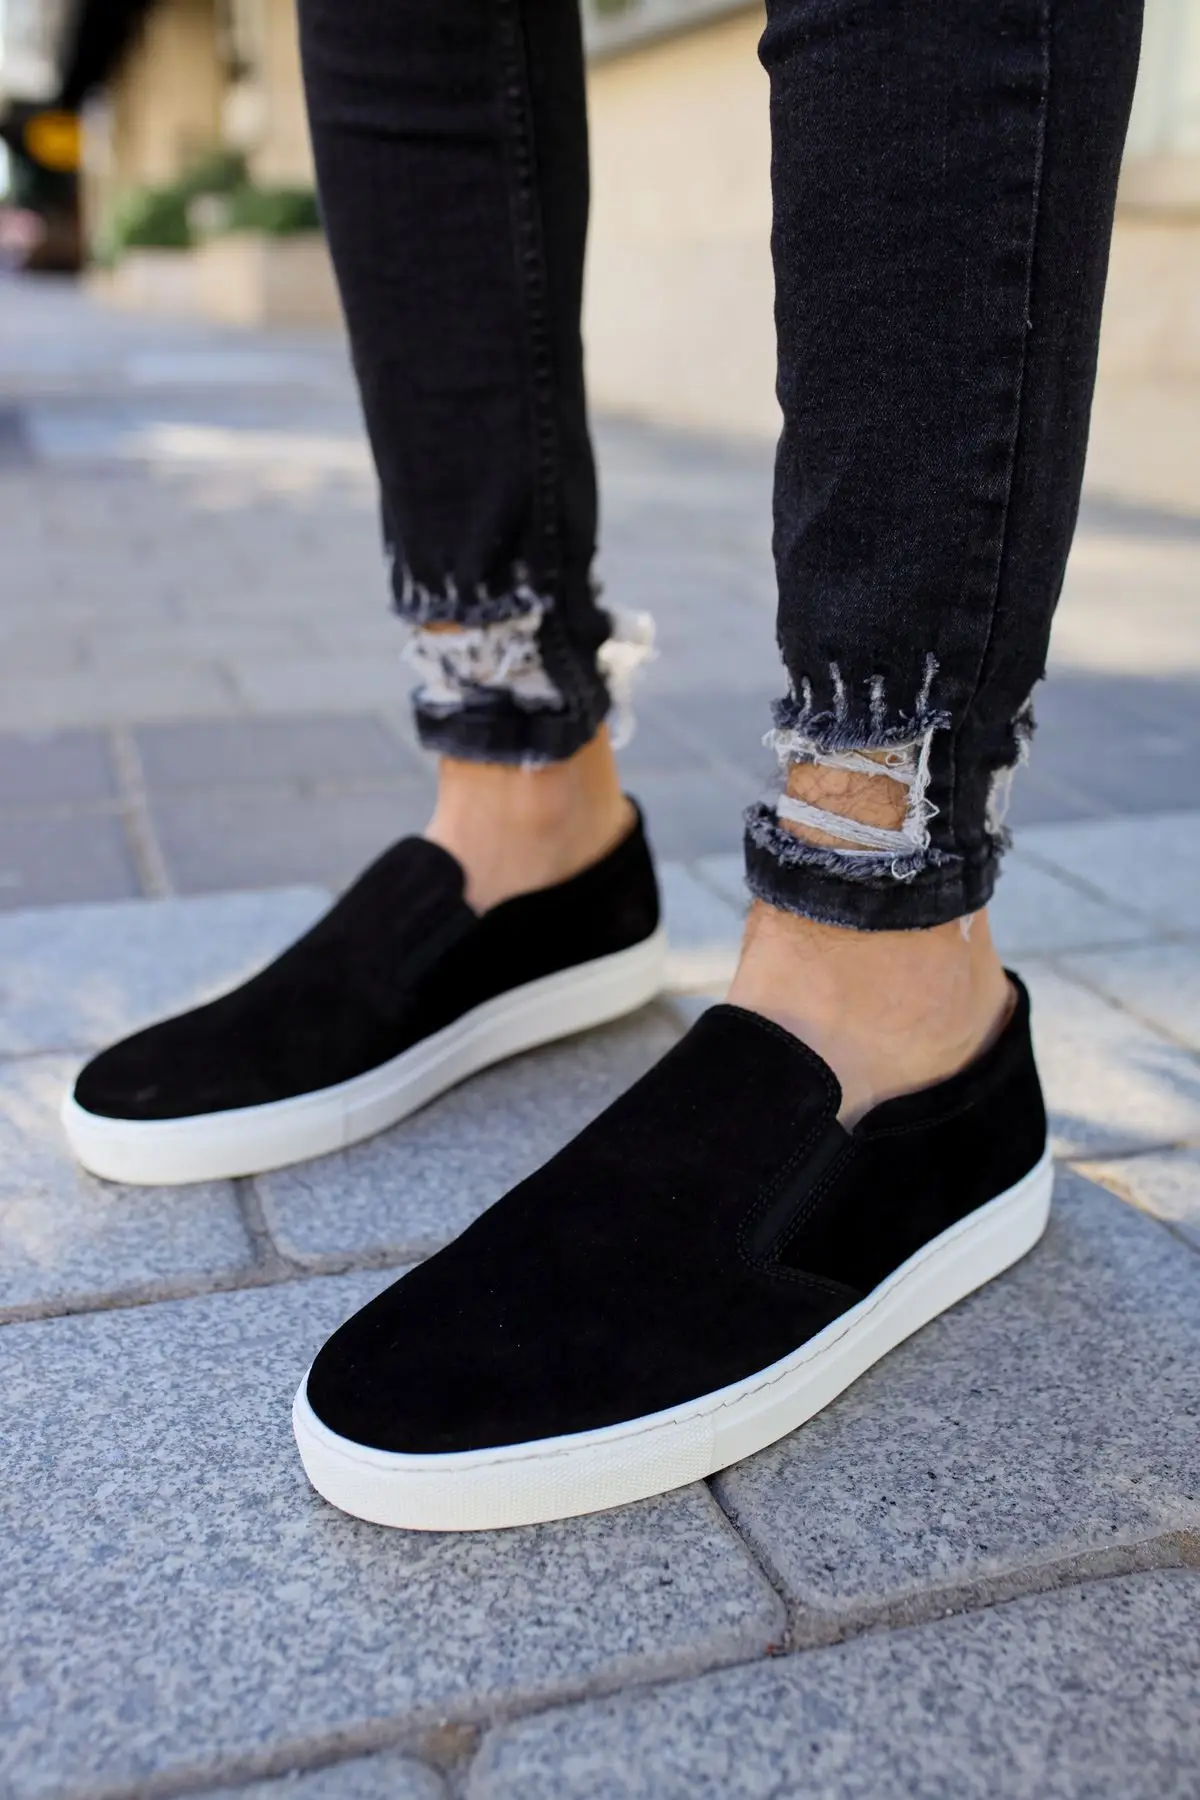 

Premium ONLY Men's Summer 2022 Season's Genuine Nubuck Suede Leather Shoes Casual Loafers Fashion Slip-on Eva Sole Rubber Breat